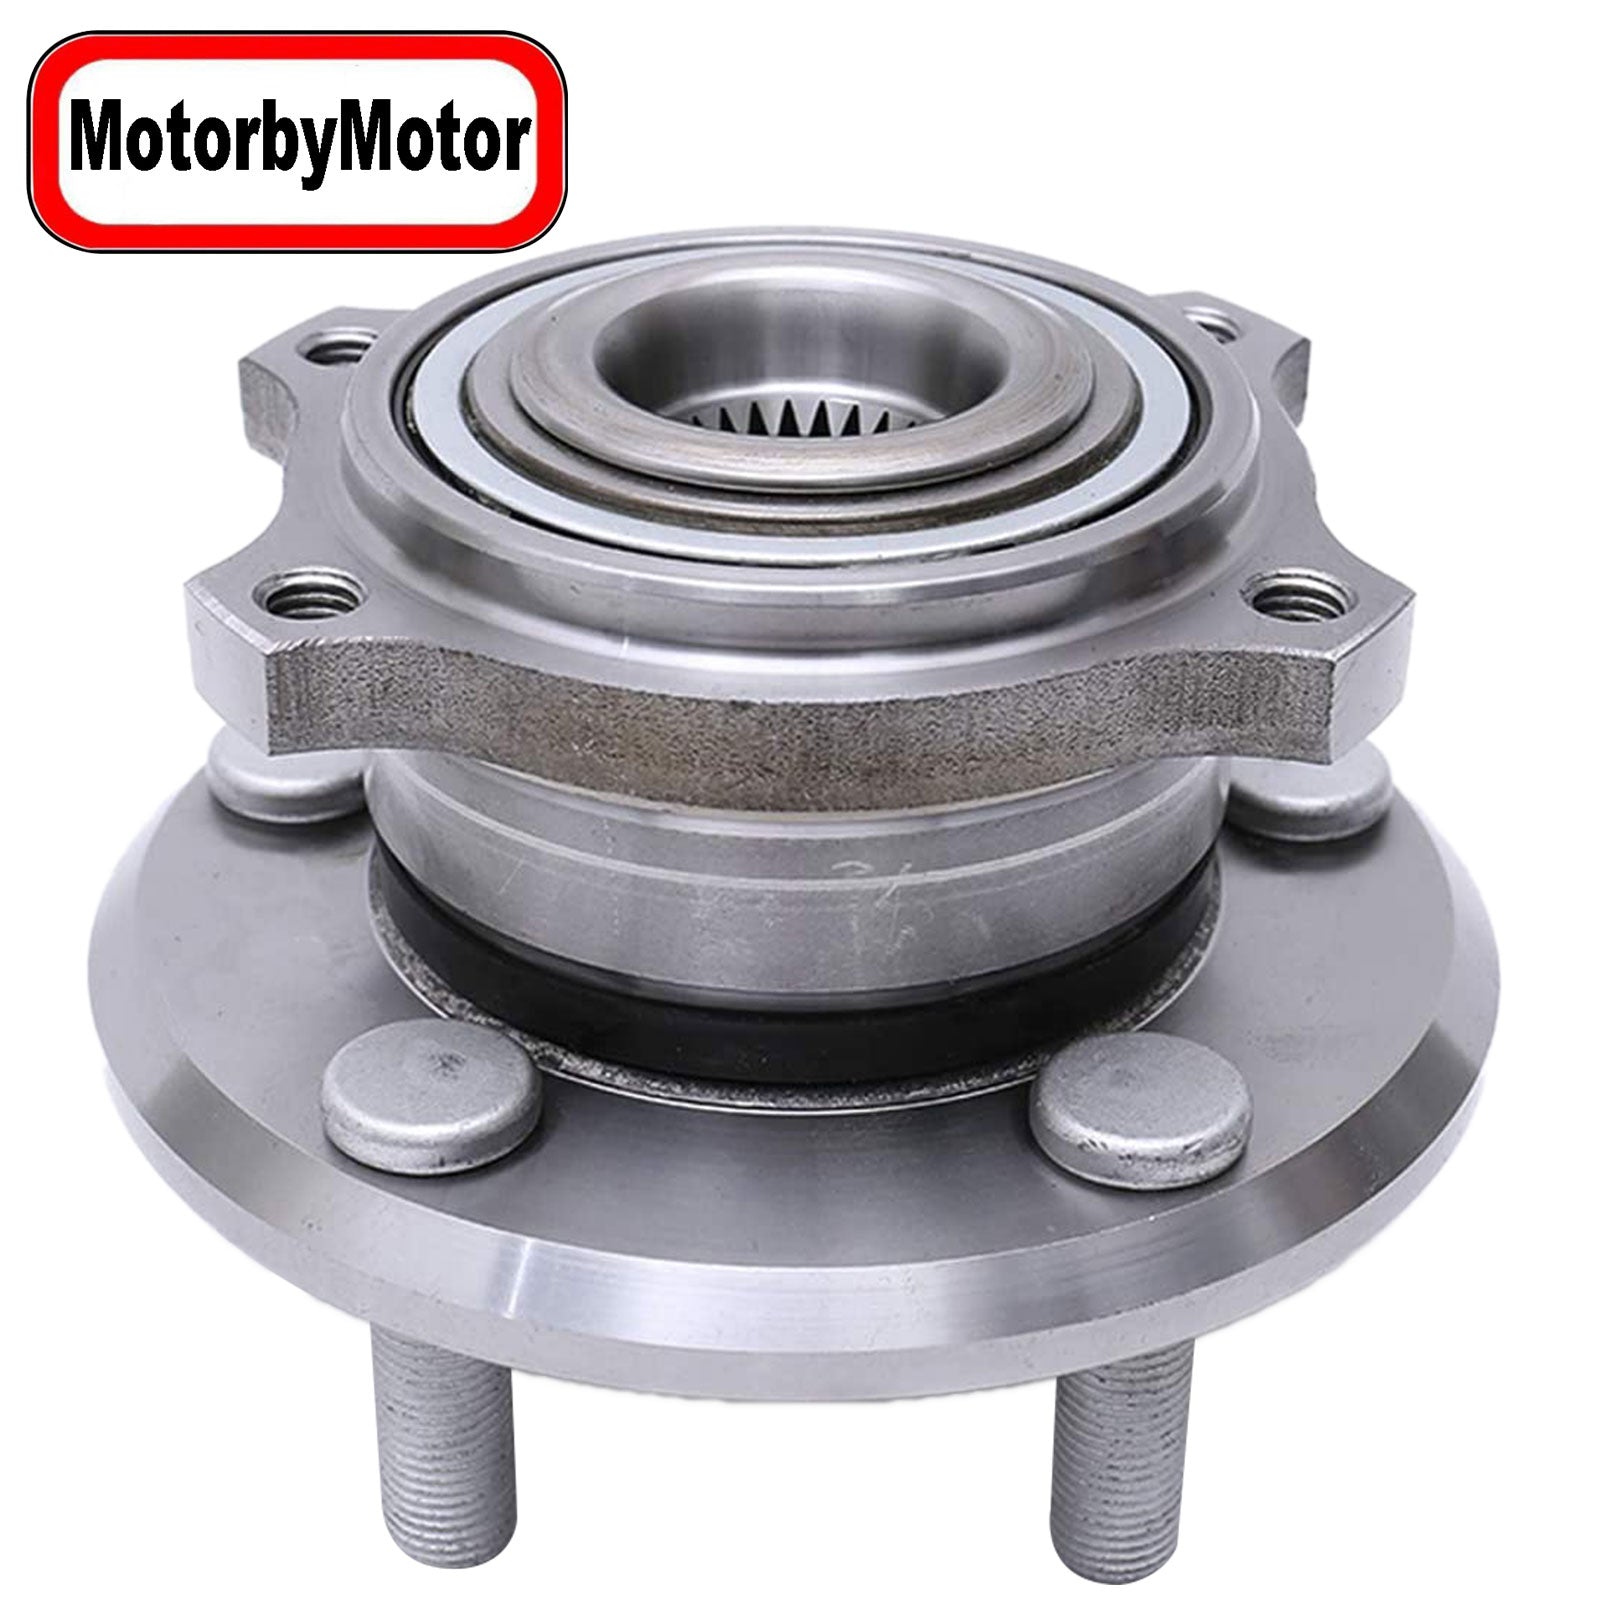 MotorbyMotor 513225 Front Wheel Bearing and Hub Assembly with 5 Lugs Fits for Dodge Charger Challenger Magnum, Chrysler 300 Low-Runout OE Directly Replacement Hub Bearing (AWD ONLY) MotorbyMotor